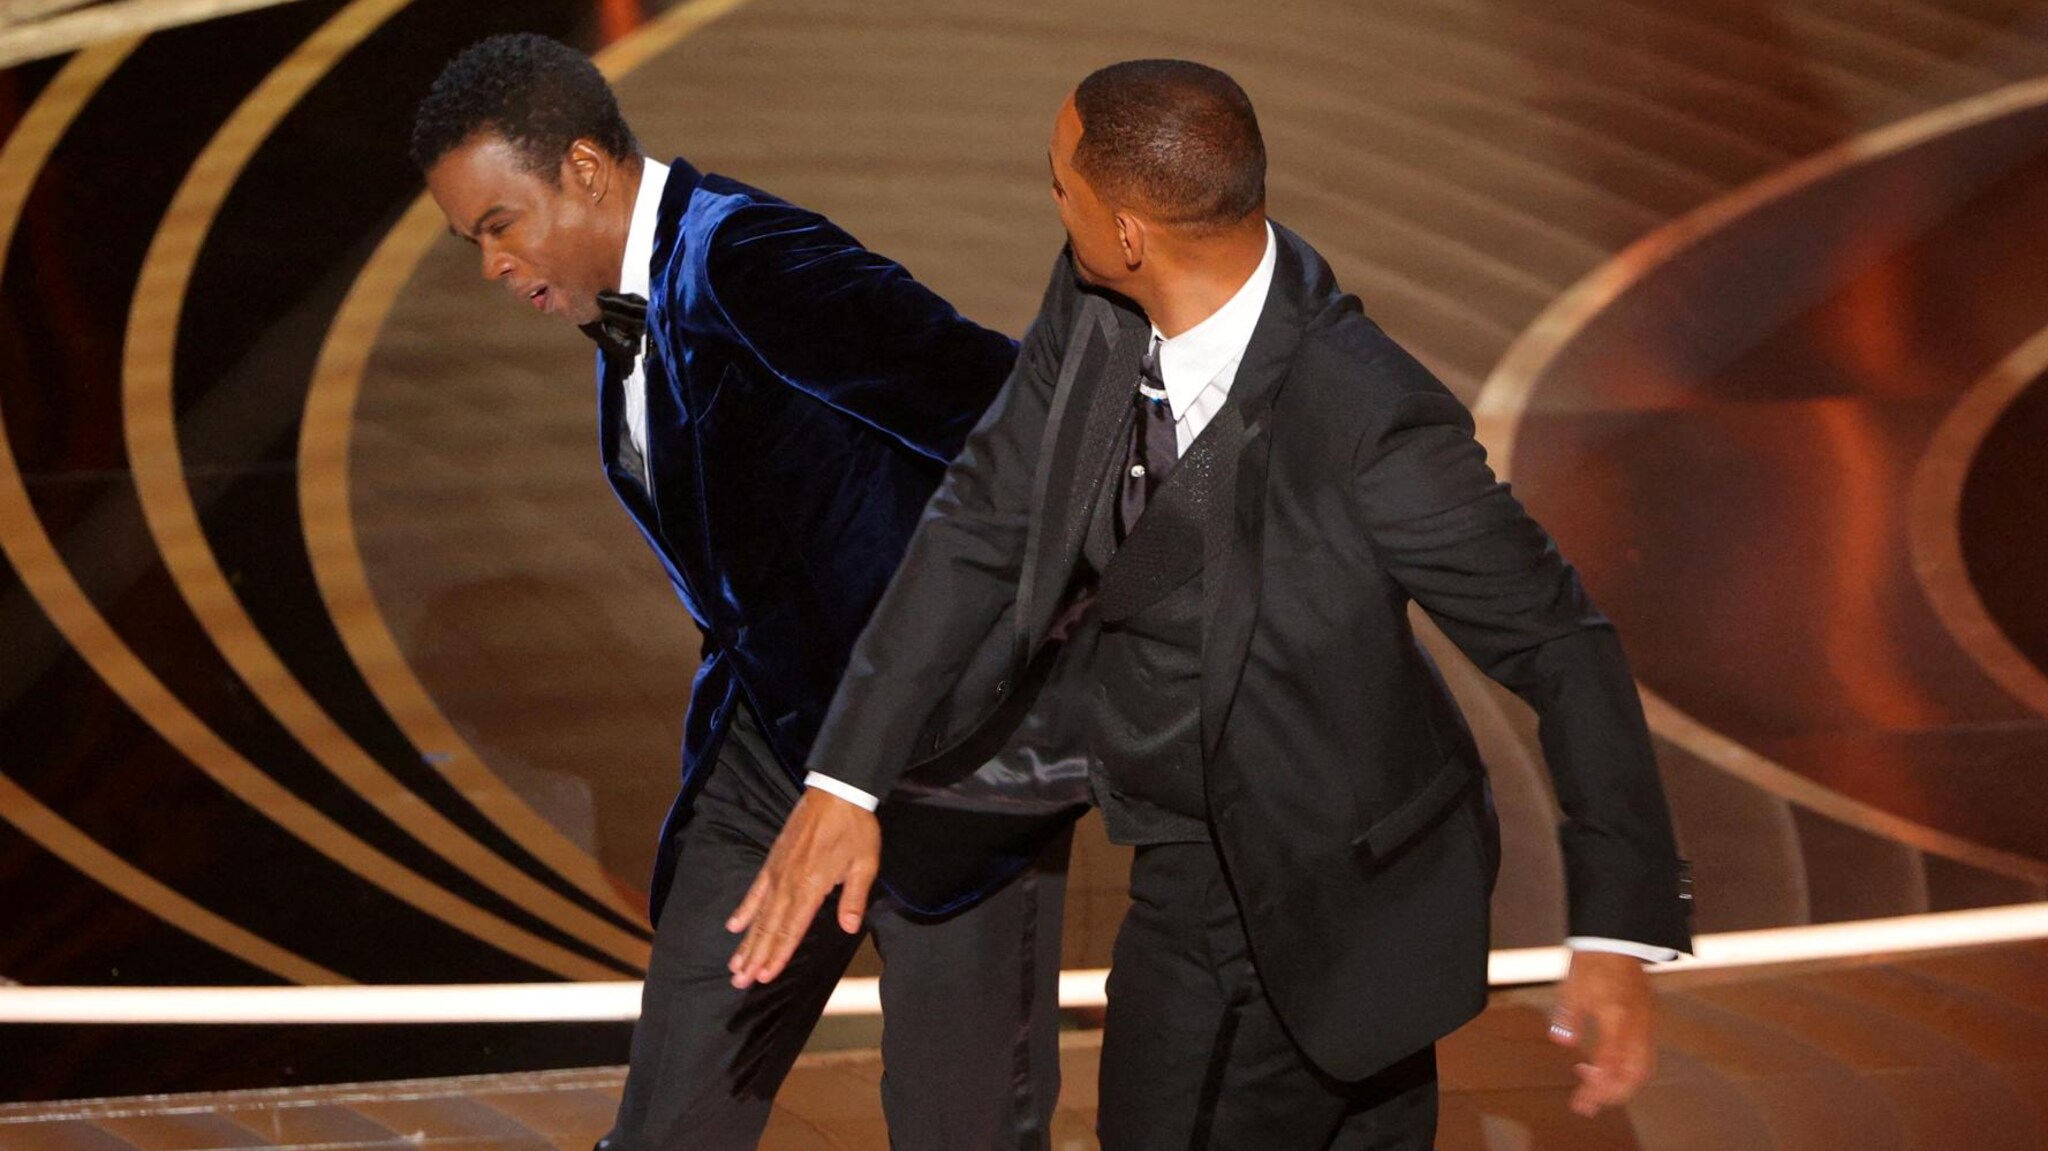 Chris Rock responds to Will Smith in a stand-up show